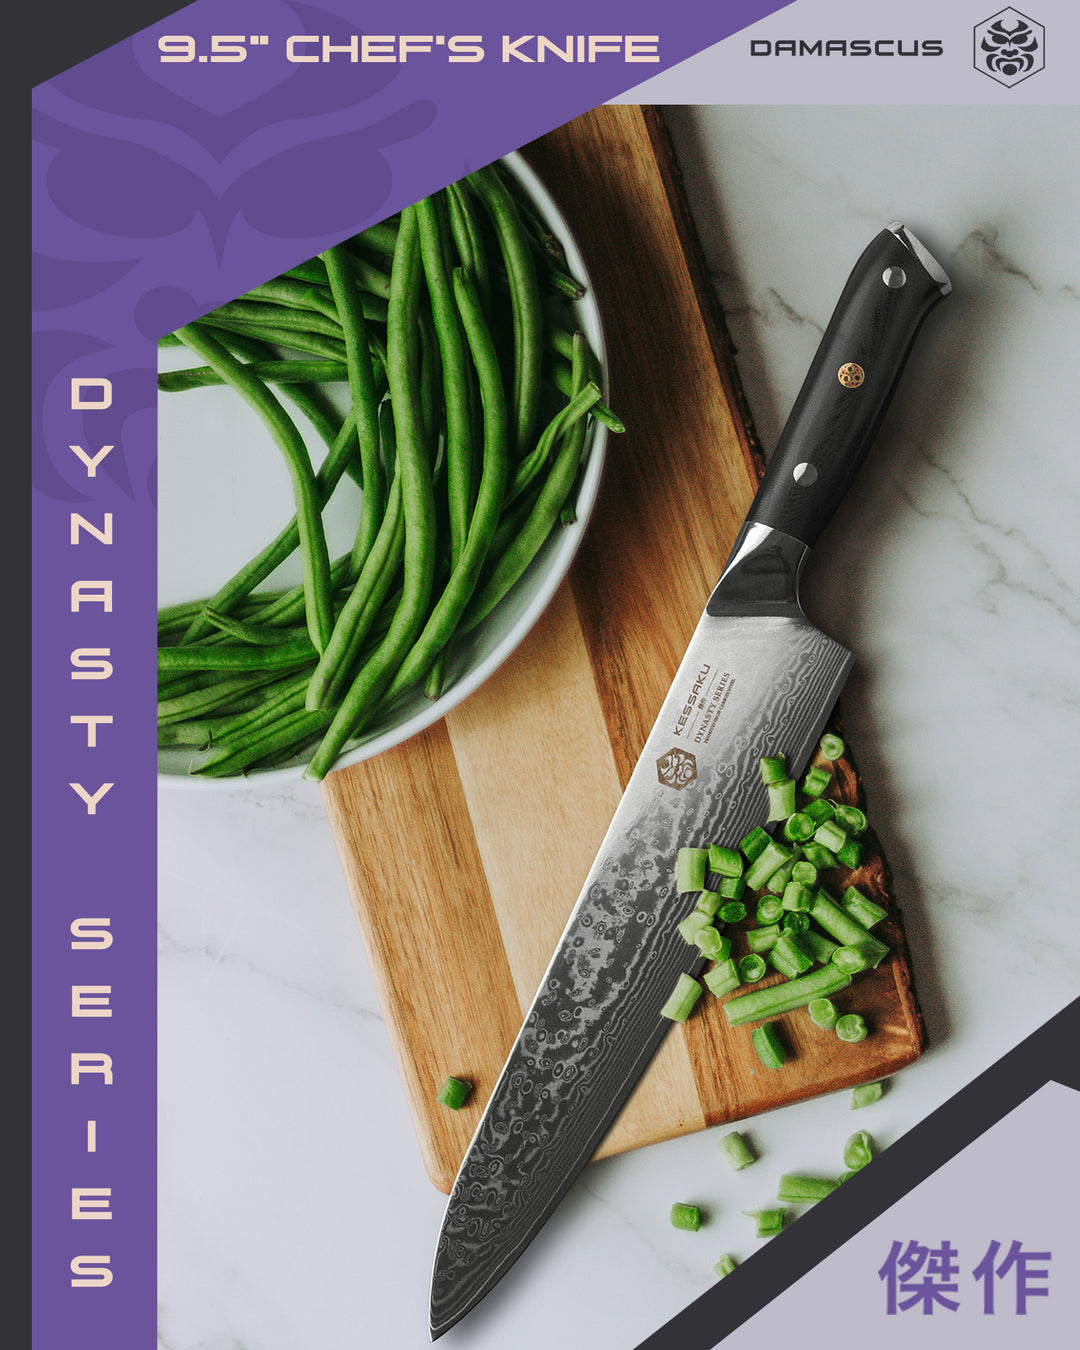 The Dynasty Damascus large Chef's Knife used to slice up green beans